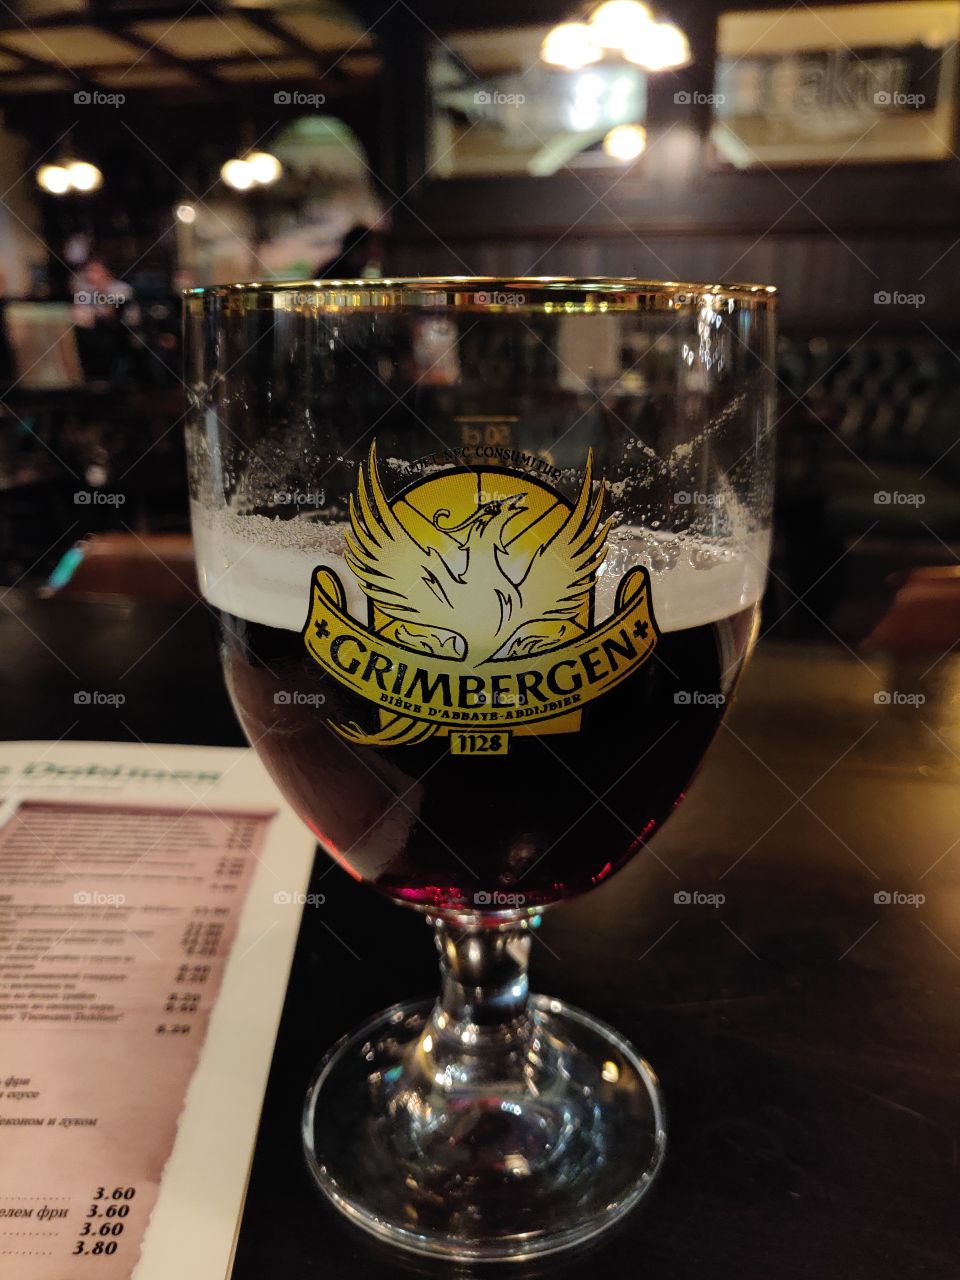 Grimbergen is the brand name of a variety of Belgianabbey beers. Originally made by Norbertine monks in the Belgian town of Grimbergen, it is now brewed by two different breweries in Belgium and France.